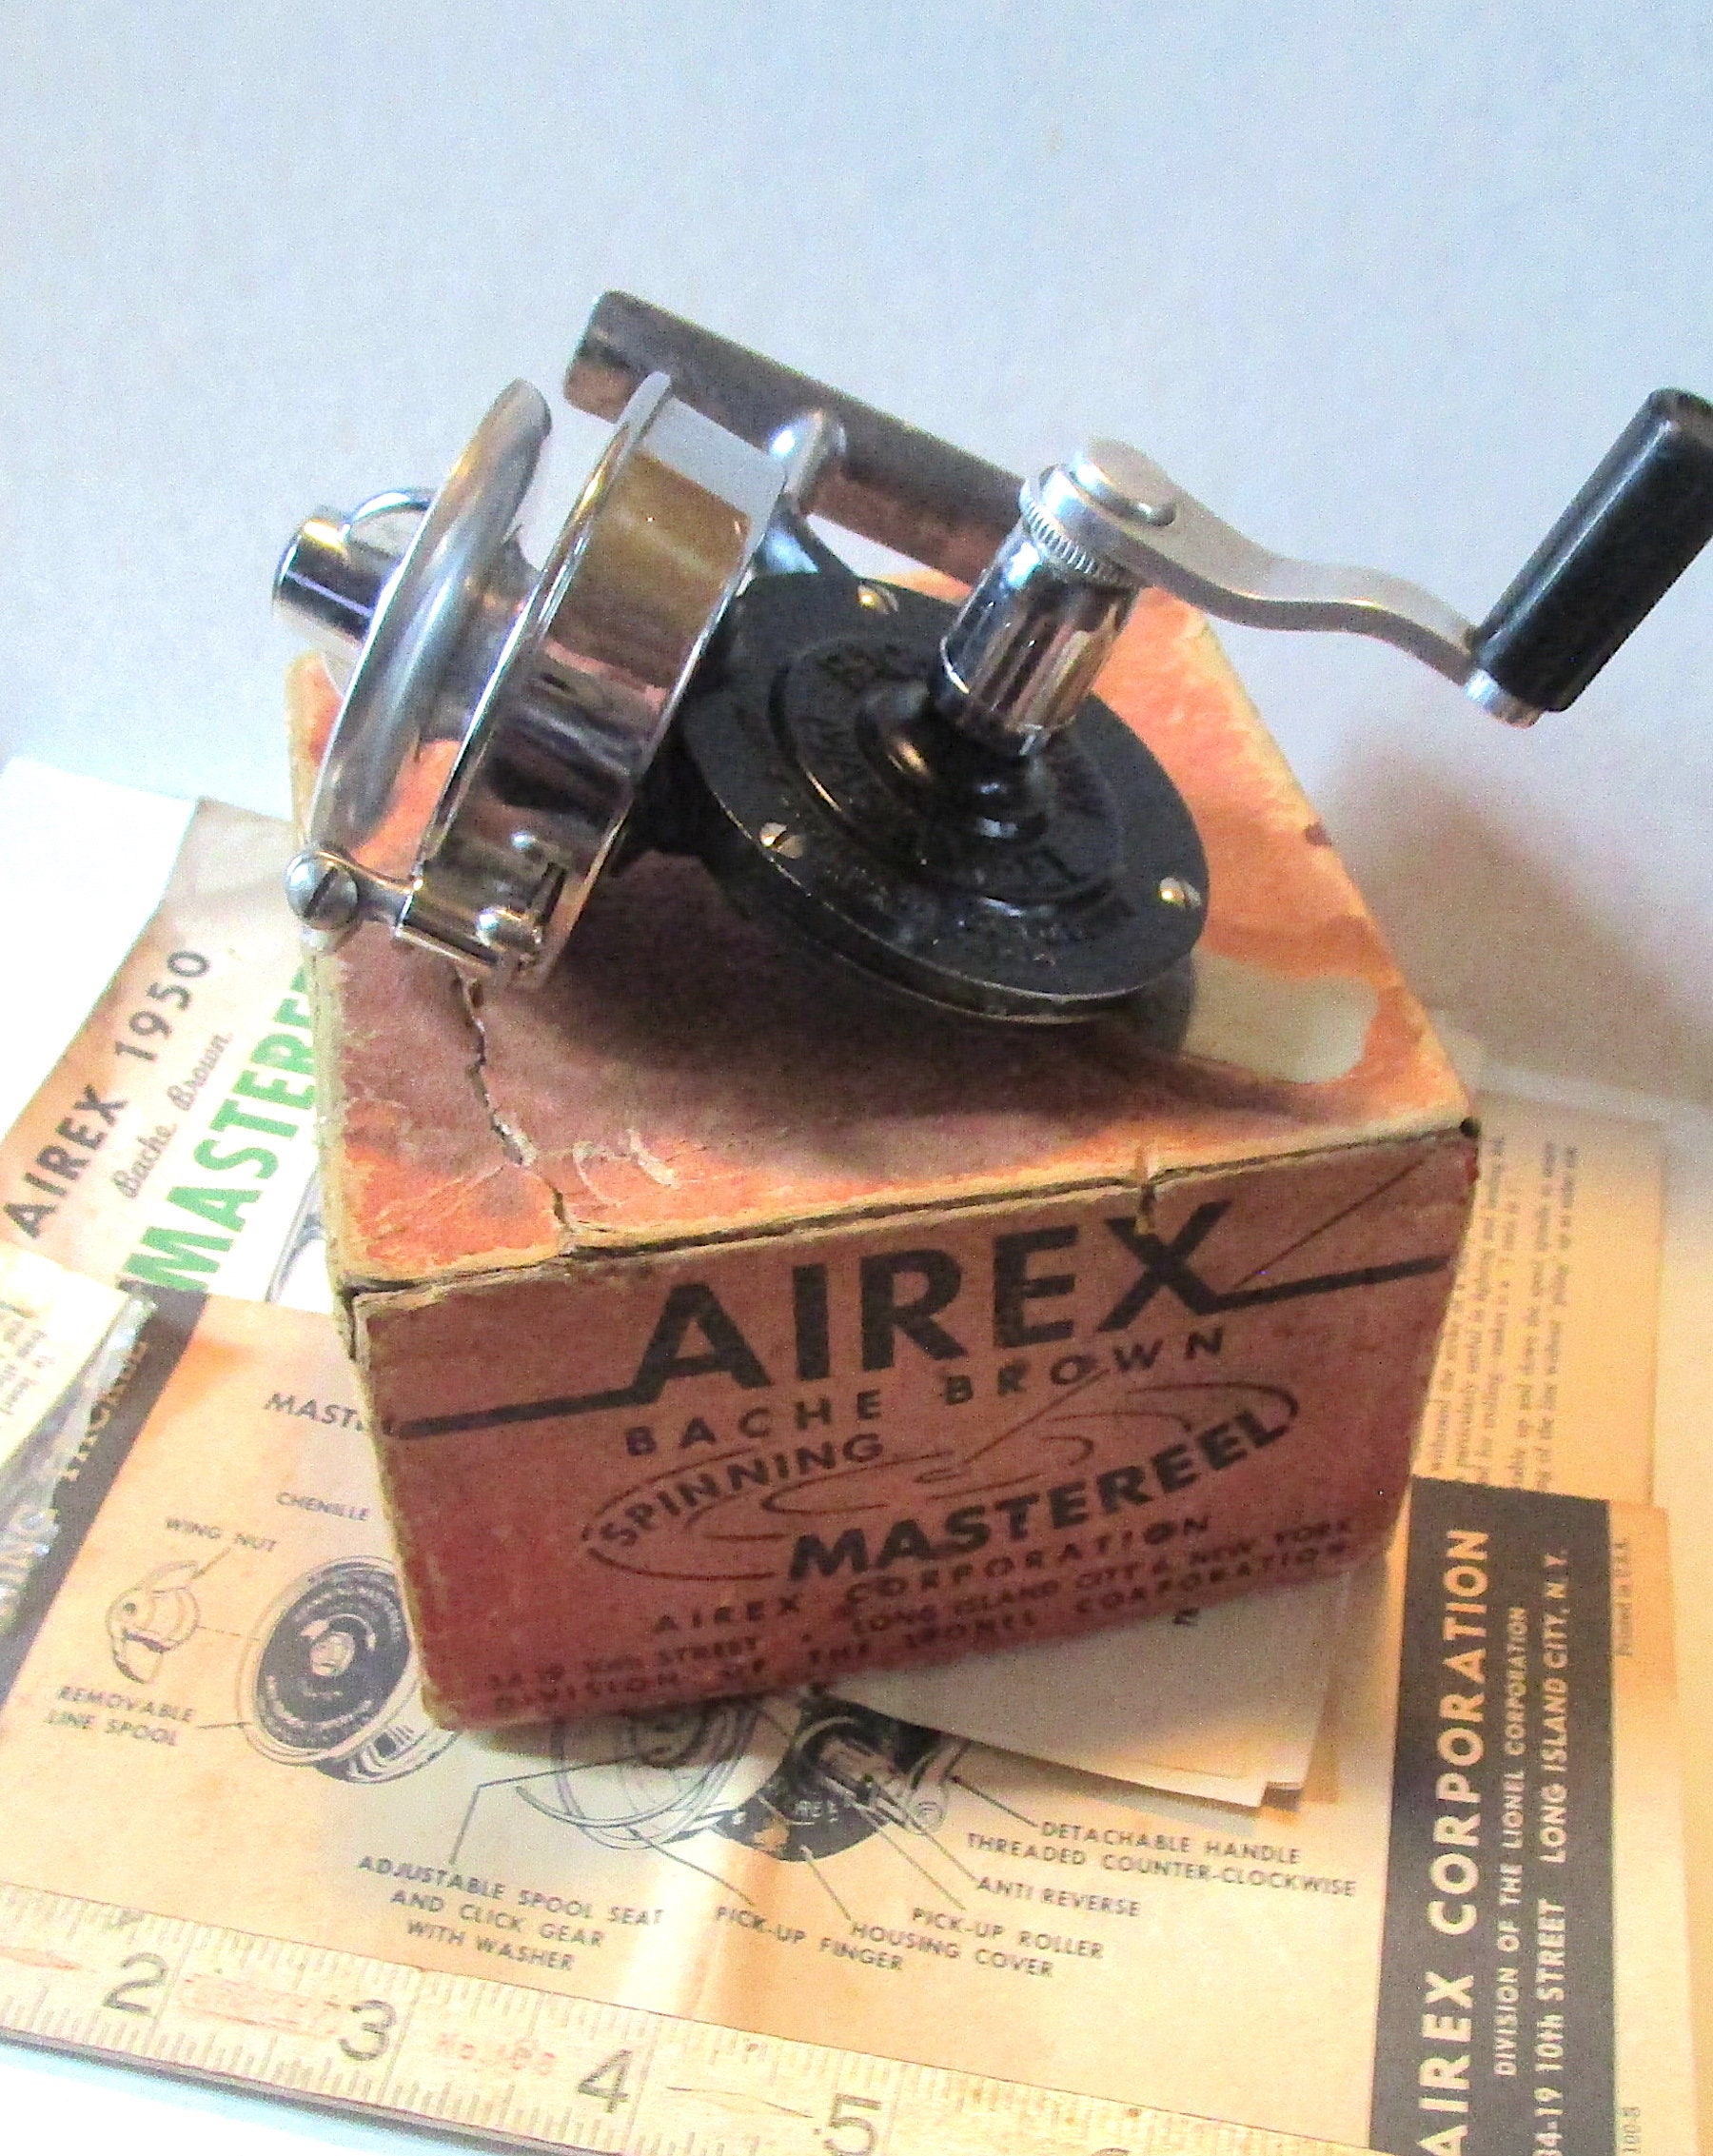 SP15 Old Airex Mastereel Vintage Spinning Fishing Tackle Reel in